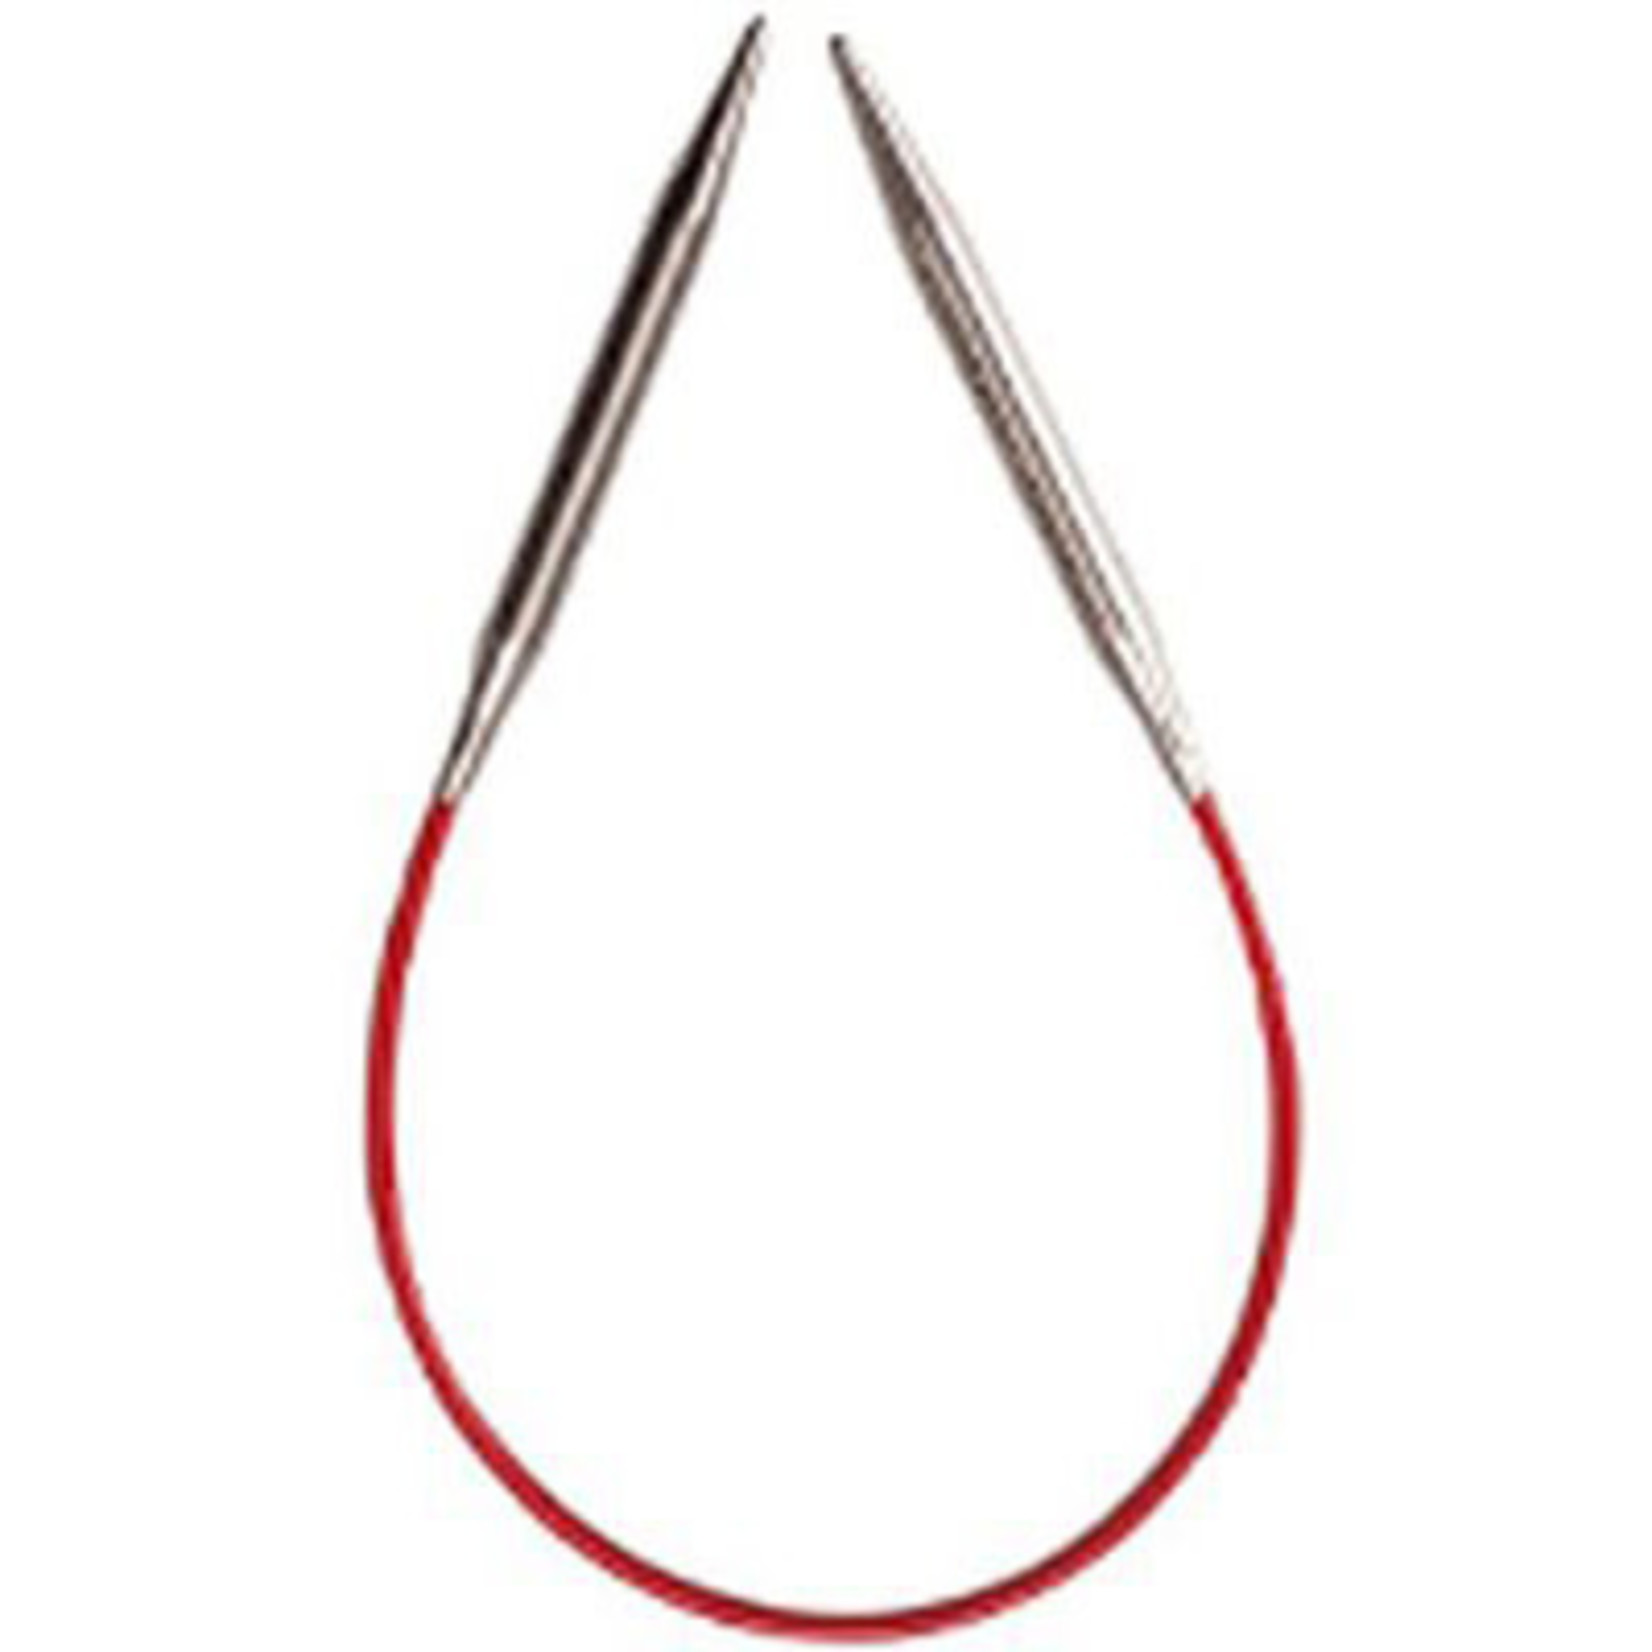 ChiaoGoo Stainless Steel Knit RED Circulars - 9" (23 cm) by ChiaoGoo